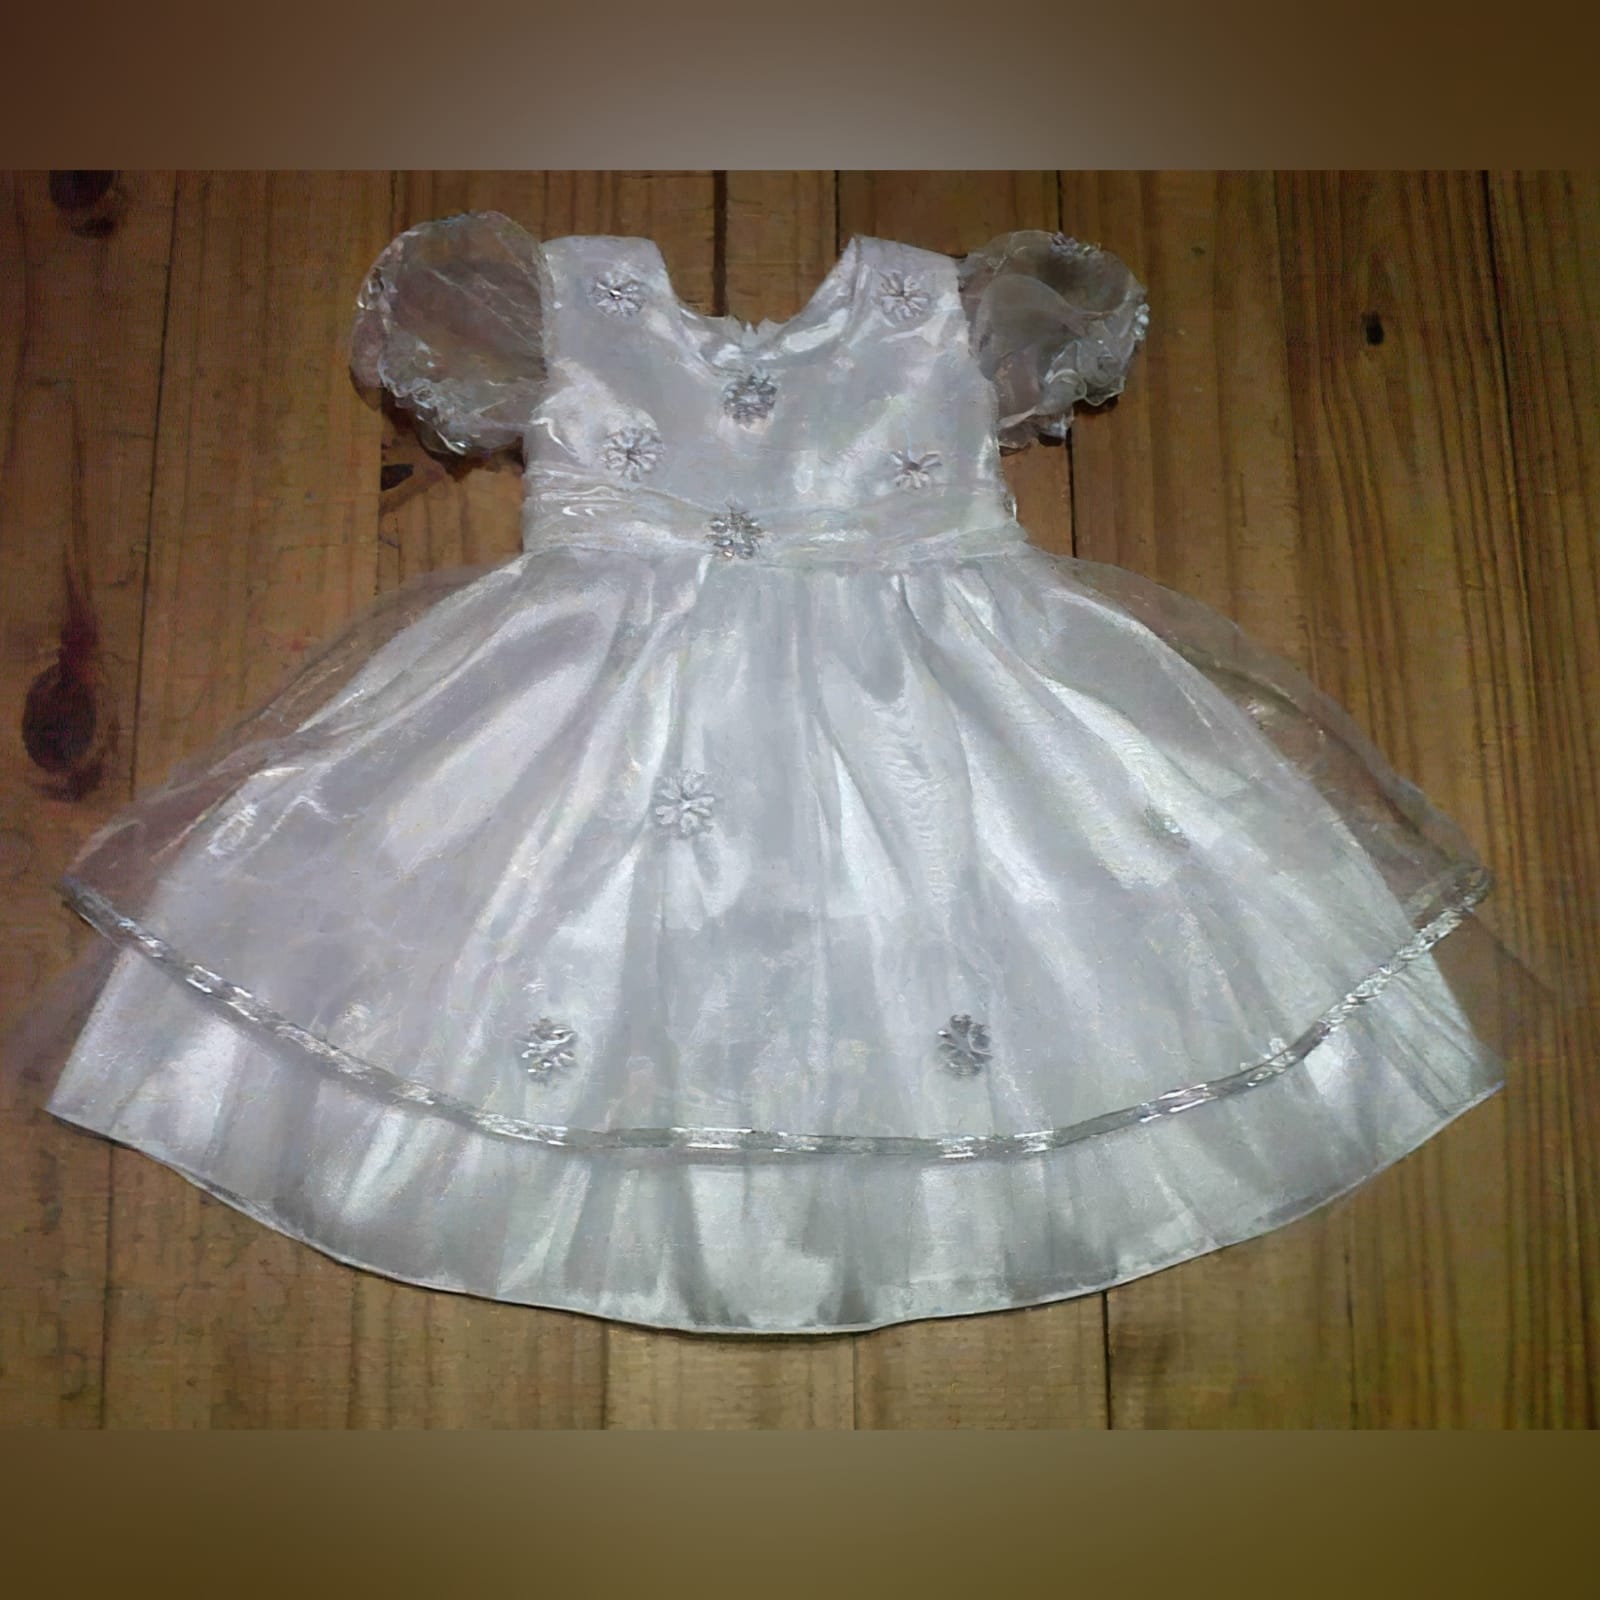 White baptism dress with silver details 2 white baptism dress made in satin with an organza overlay detailed with silver flowers and silver ribbon and short bubble sleeves.